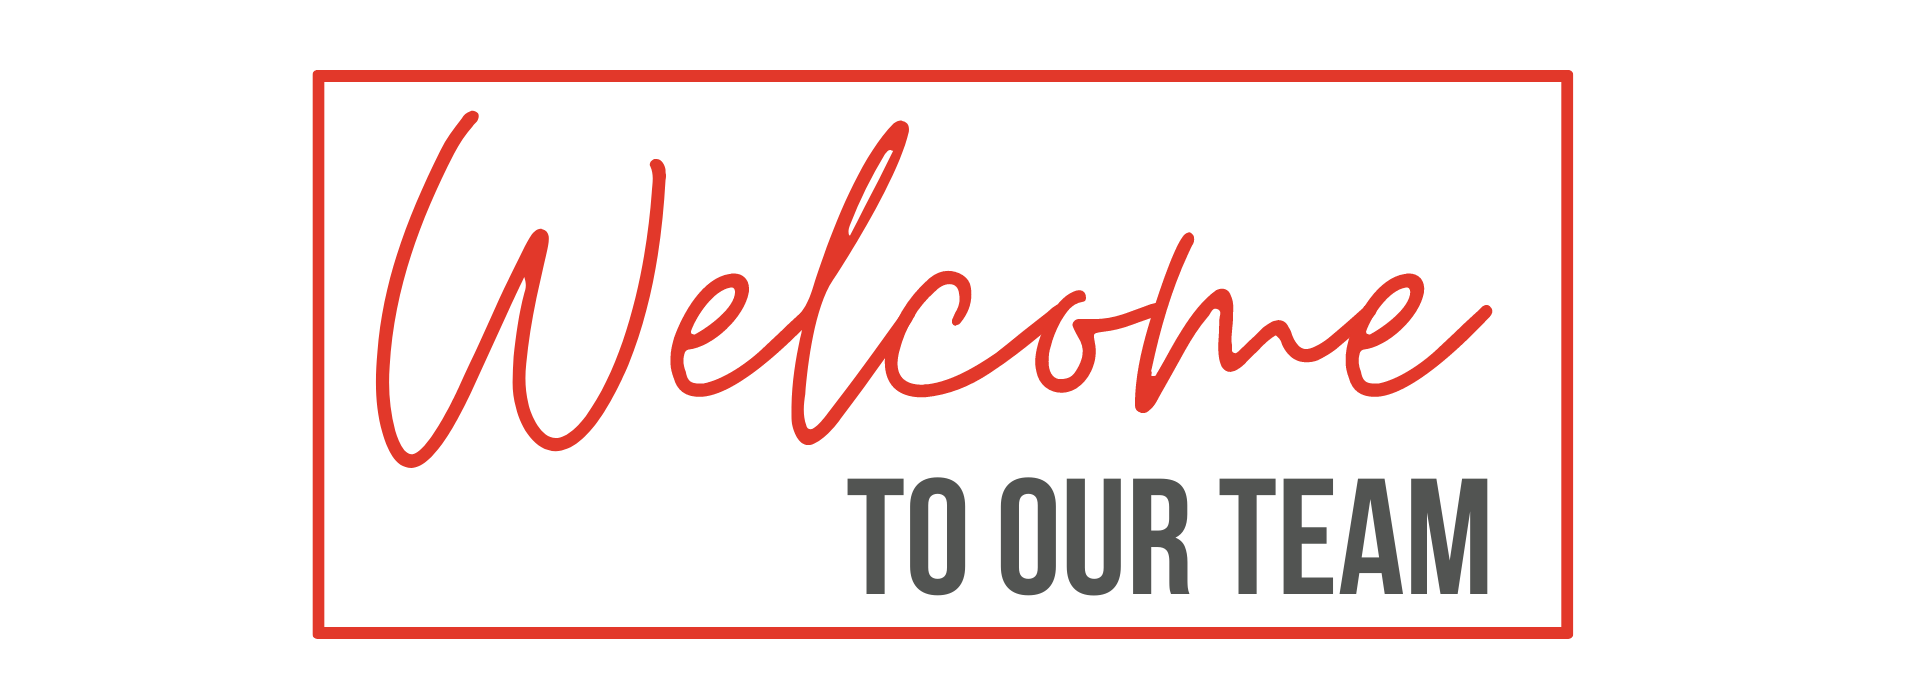 HEITEC Jobs Welcome to our team